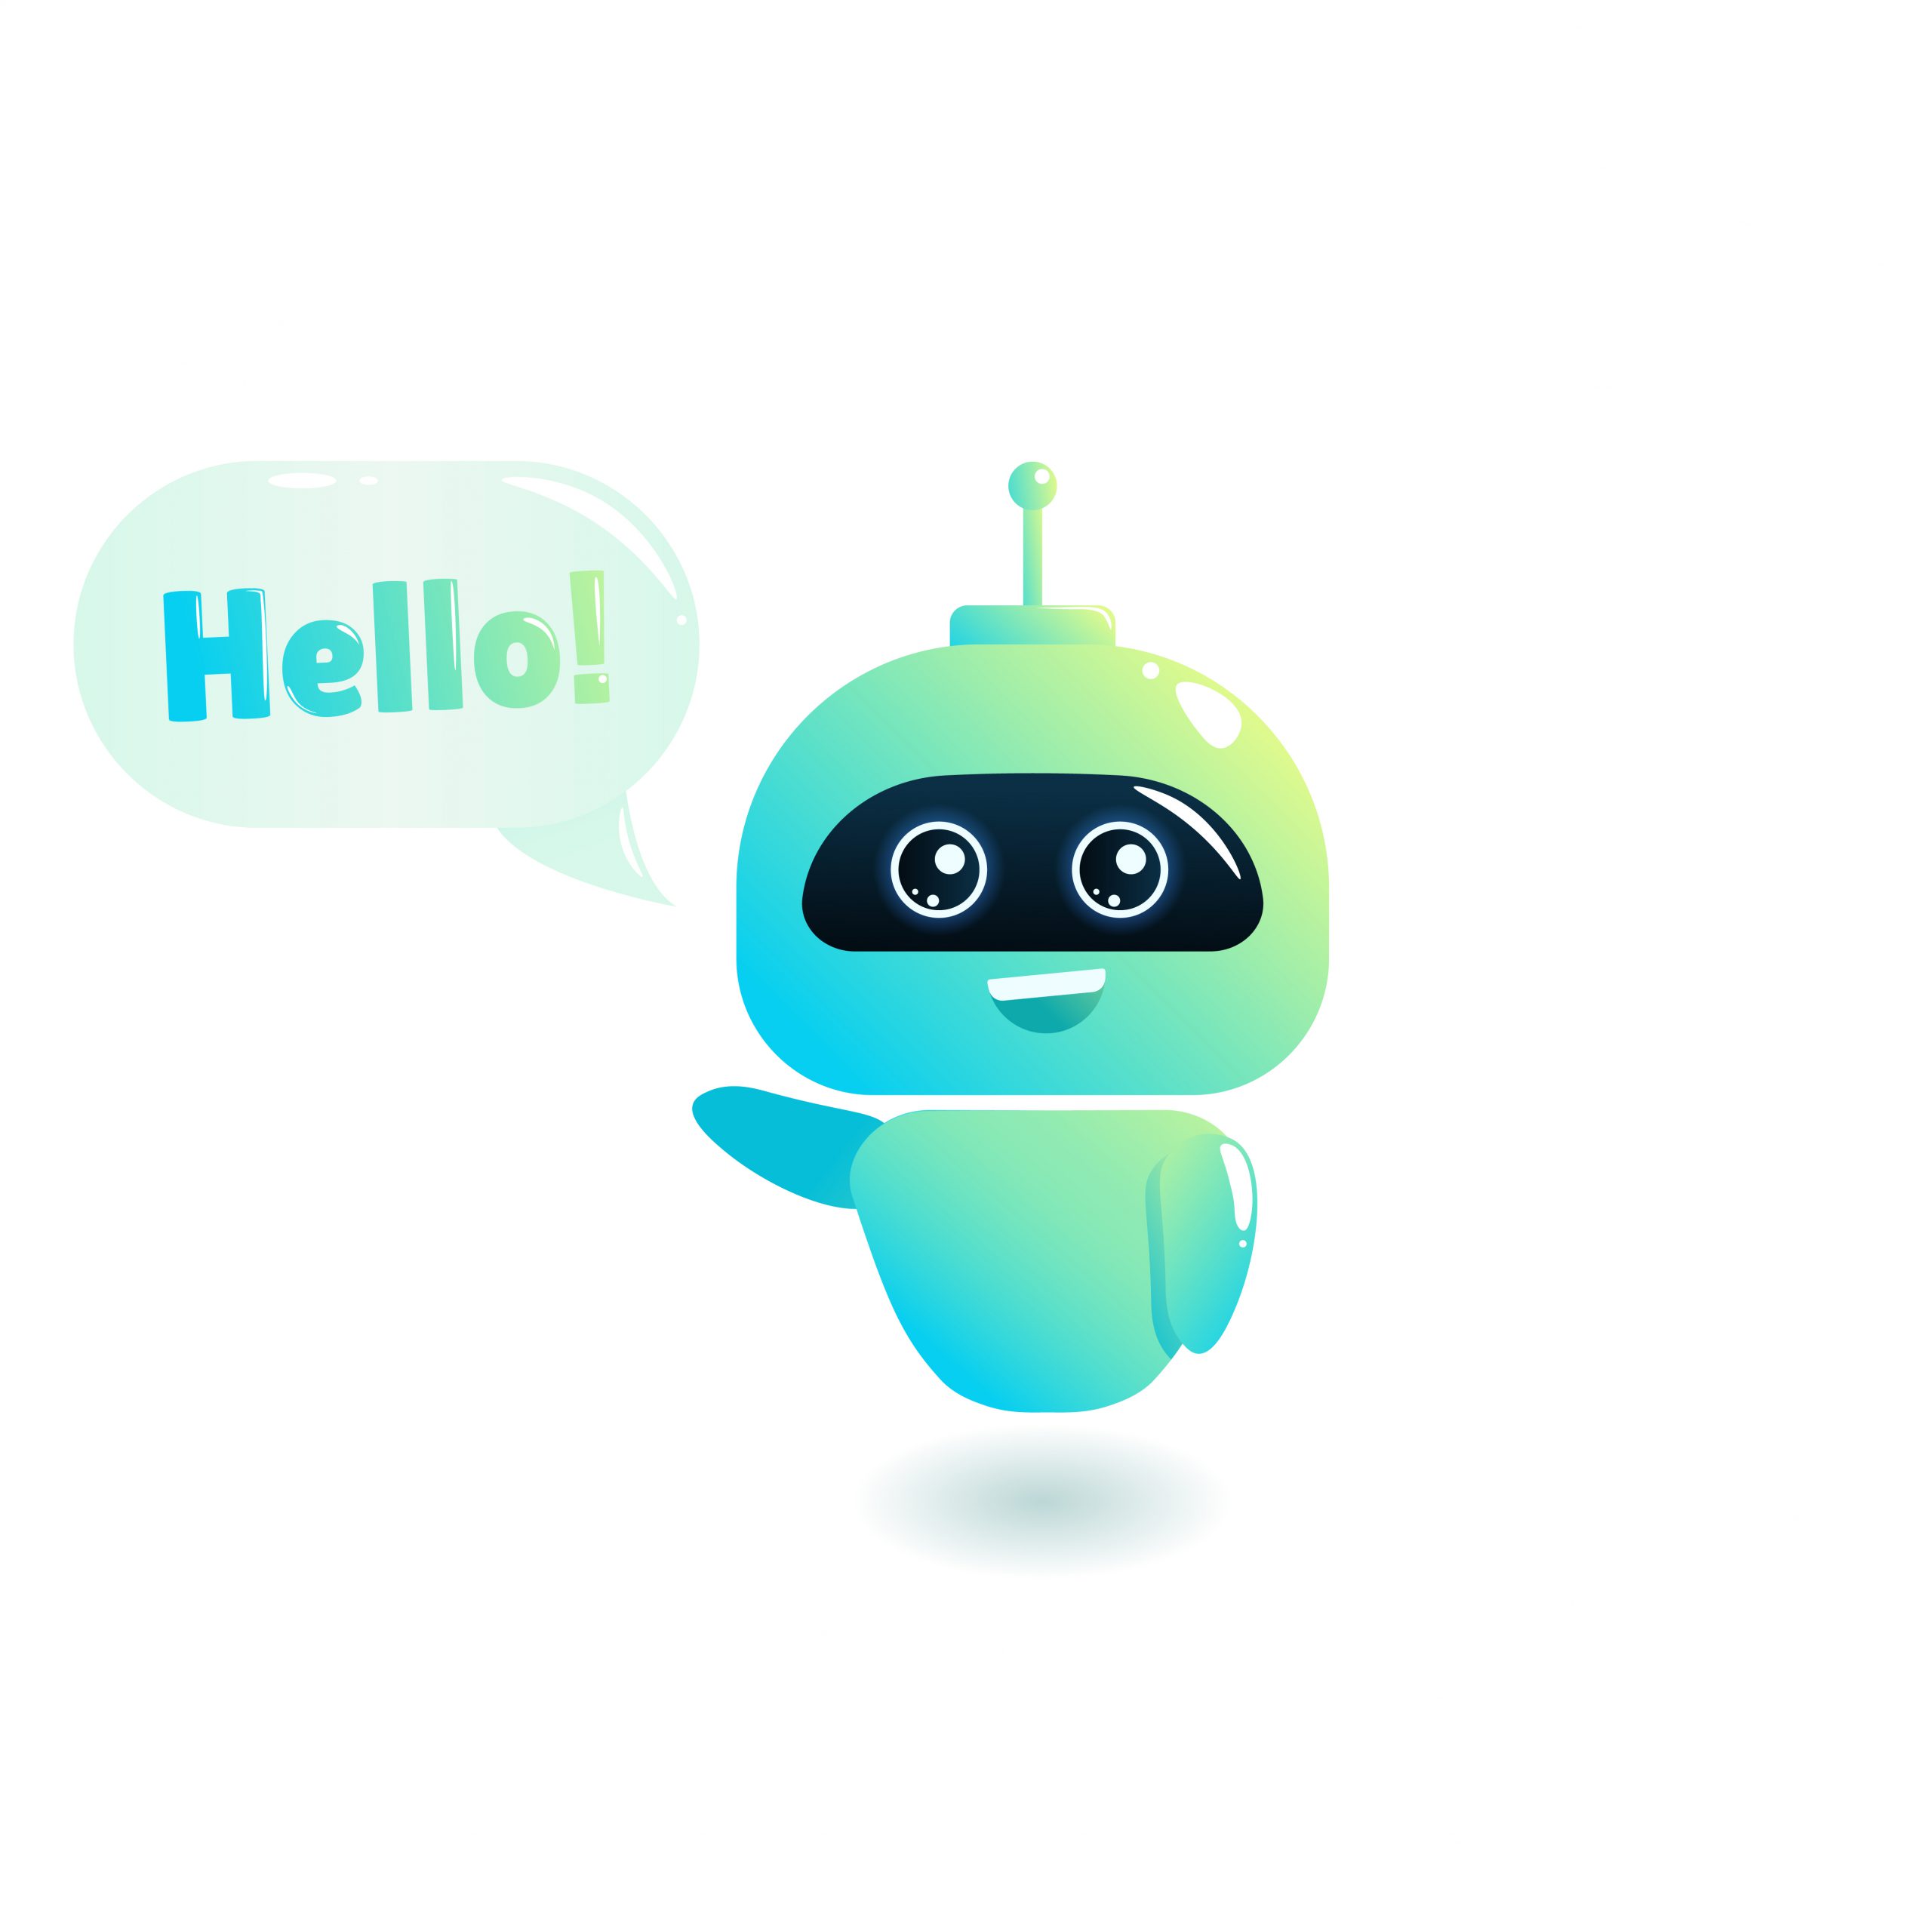 Cute bot say users Hello. Chatbot greets. Online consultation. Vector cartoon illustration